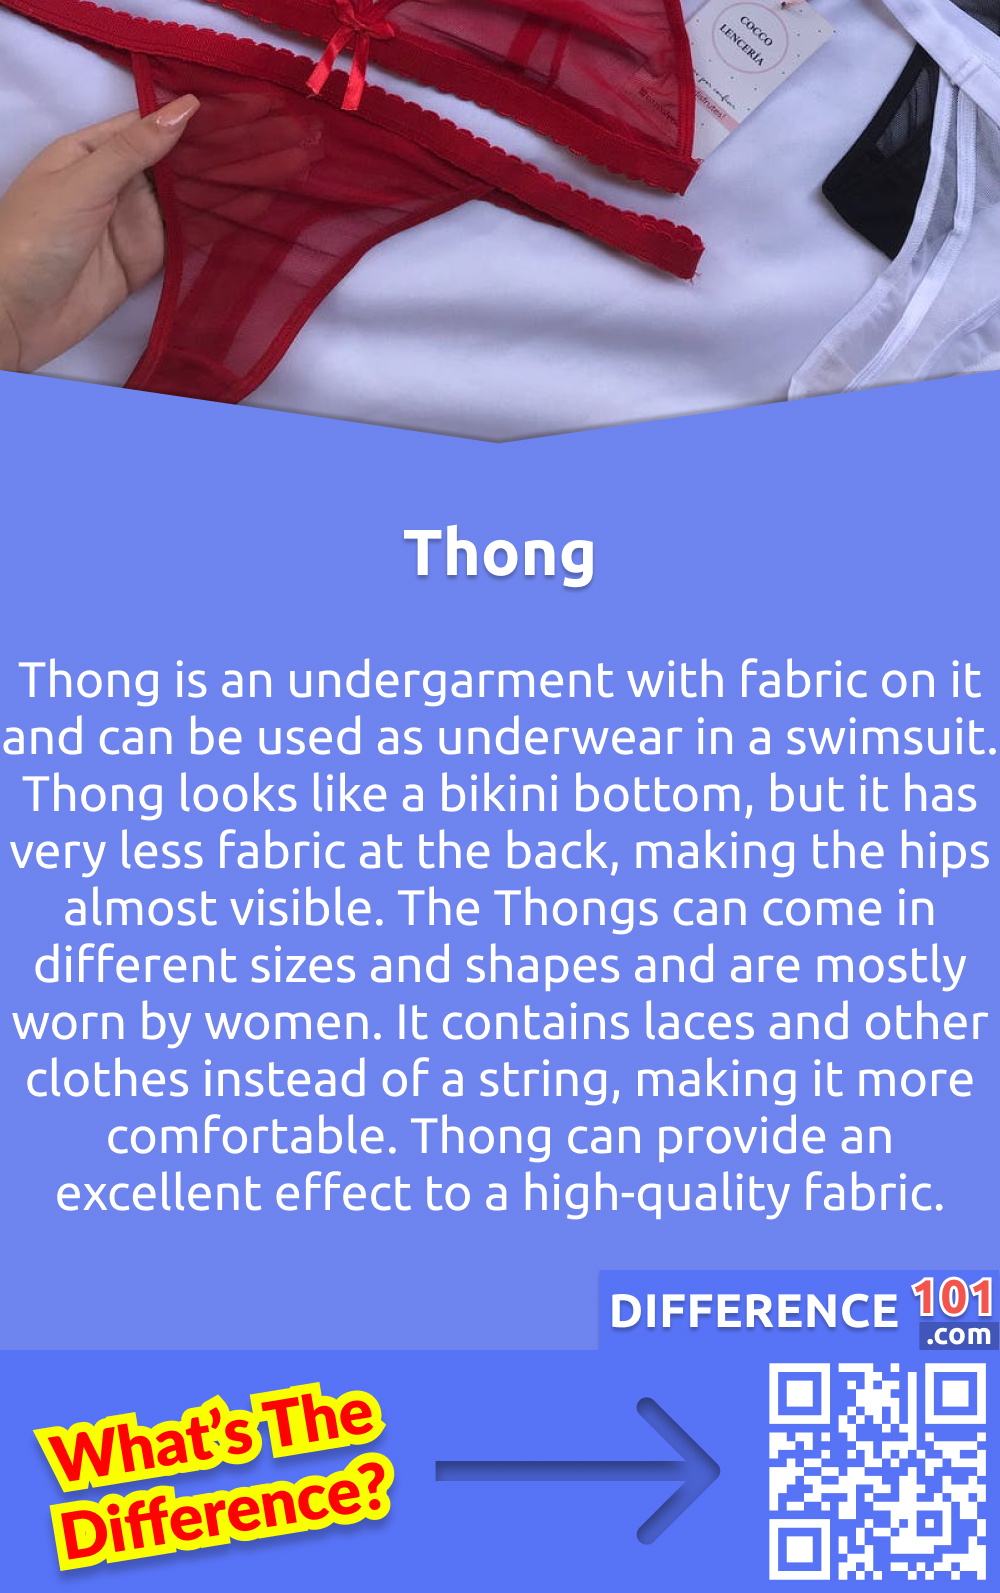 What is a Thong? Thong is an undergarment with fabric on it and can be used as underwear in a swimsuit. Thong looks like a bikini bottom, but it has very less fabric at the back, making the hips almost visible. The Thongs can come in different sizes and shapes and are mostly worn by women. It contains laces and other clothes instead of a string, making it more comfortable. Thong can provide an excellent effect to a high-quality fabric.